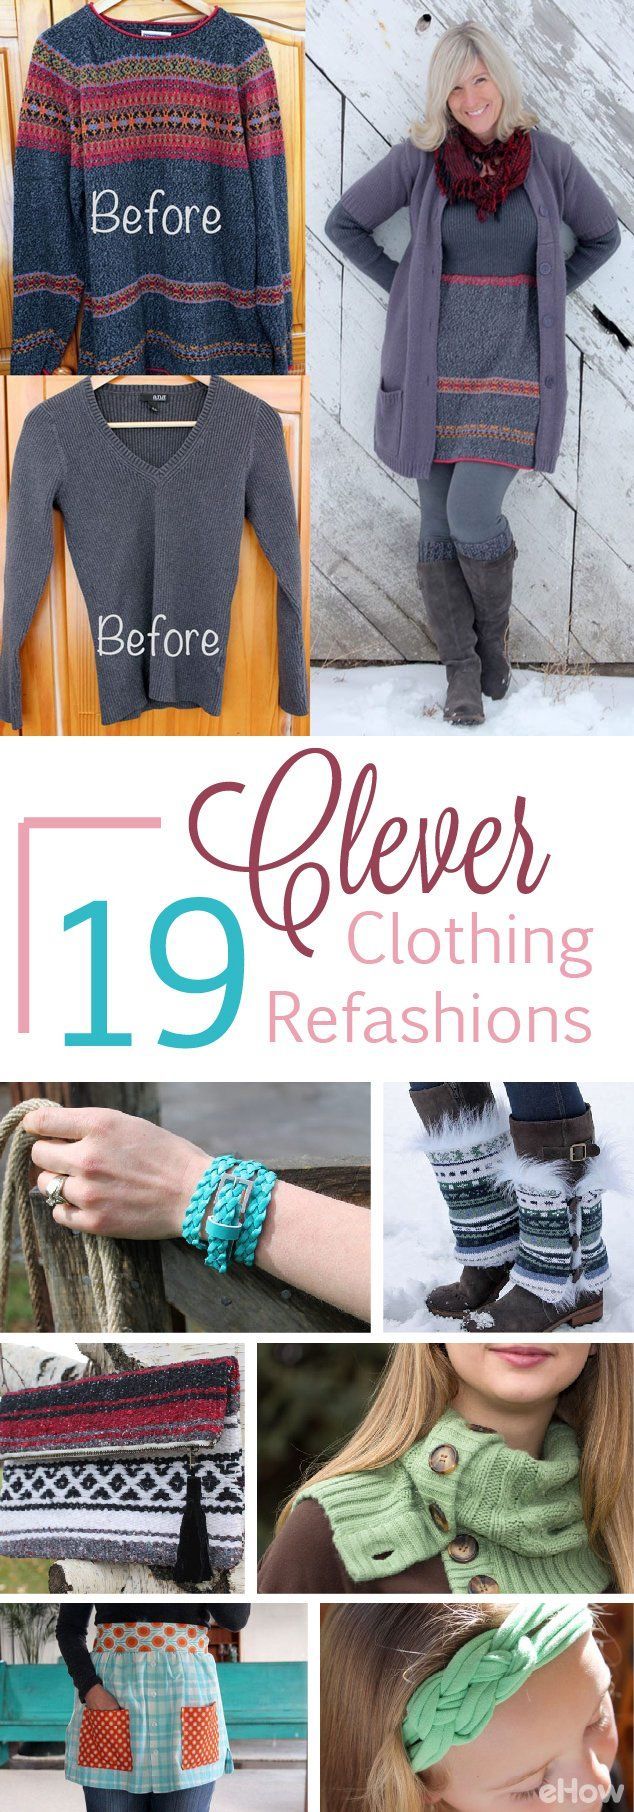 19 Clever Ways to Refashion Your Clothes -   17 DIY Clothes money ideas